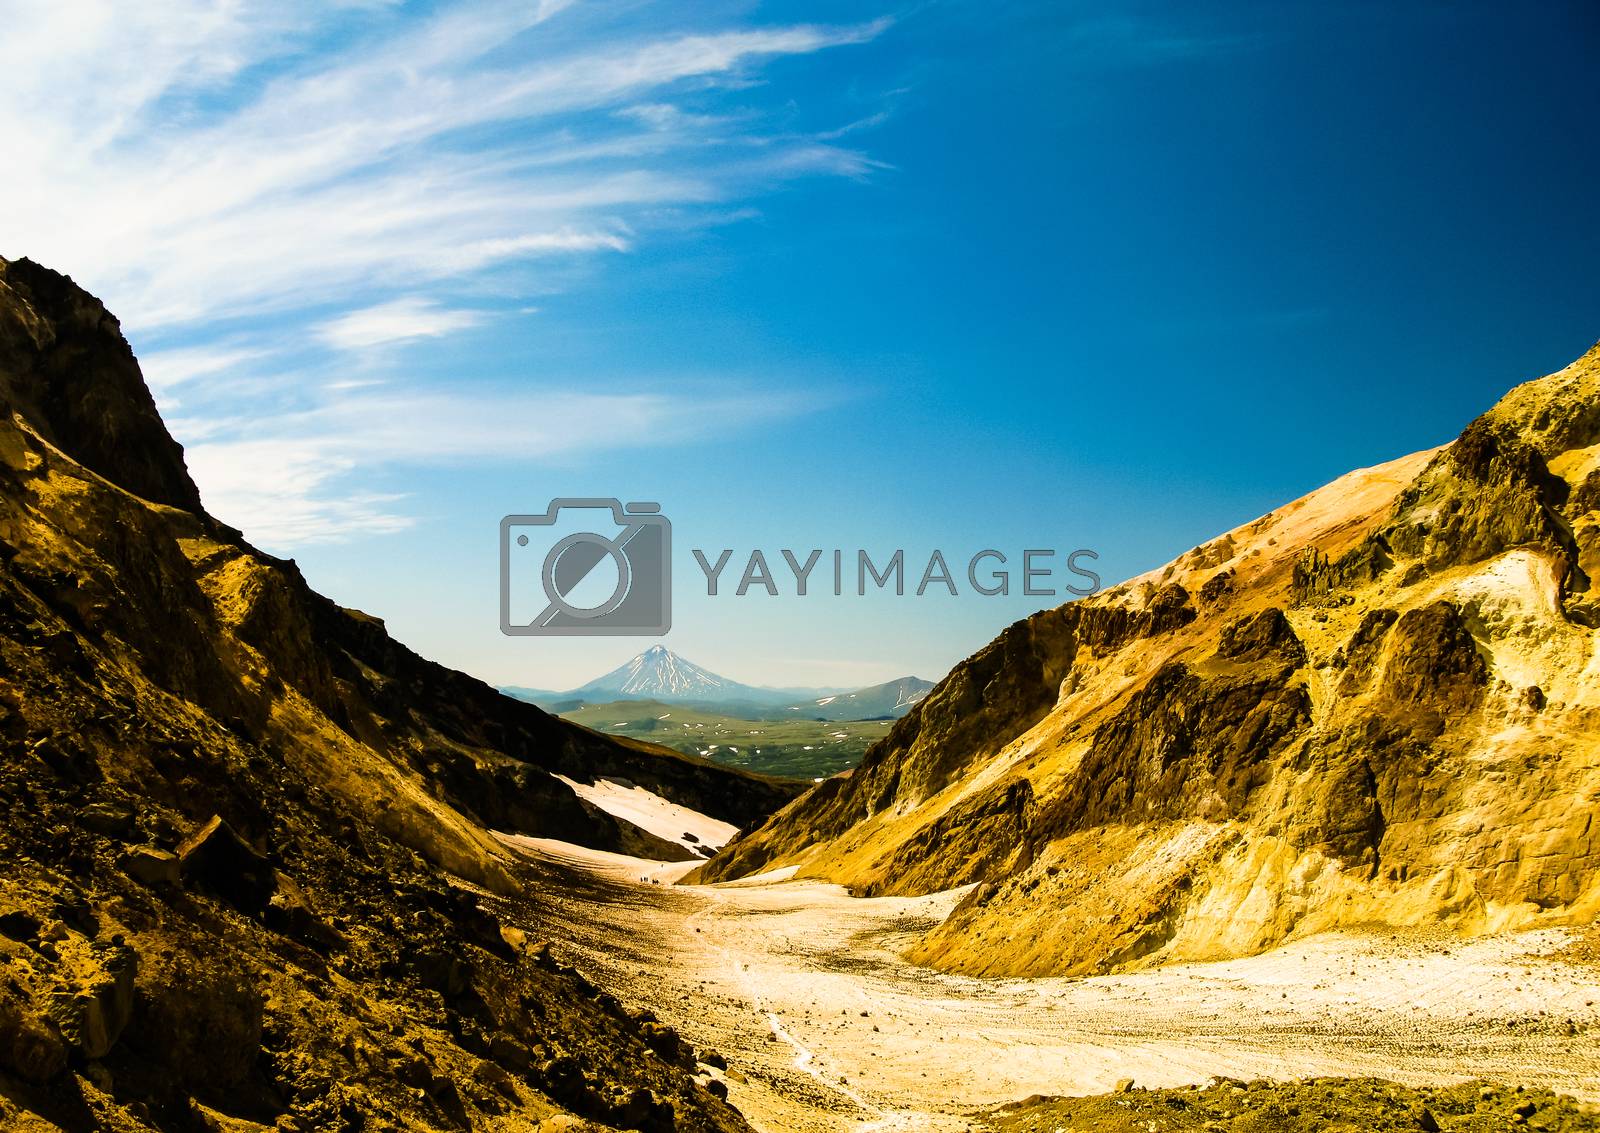 Royalty free image of View to Viluchinsky volcano from the caldera of Mutnovsky, Kamch by homocosmicos